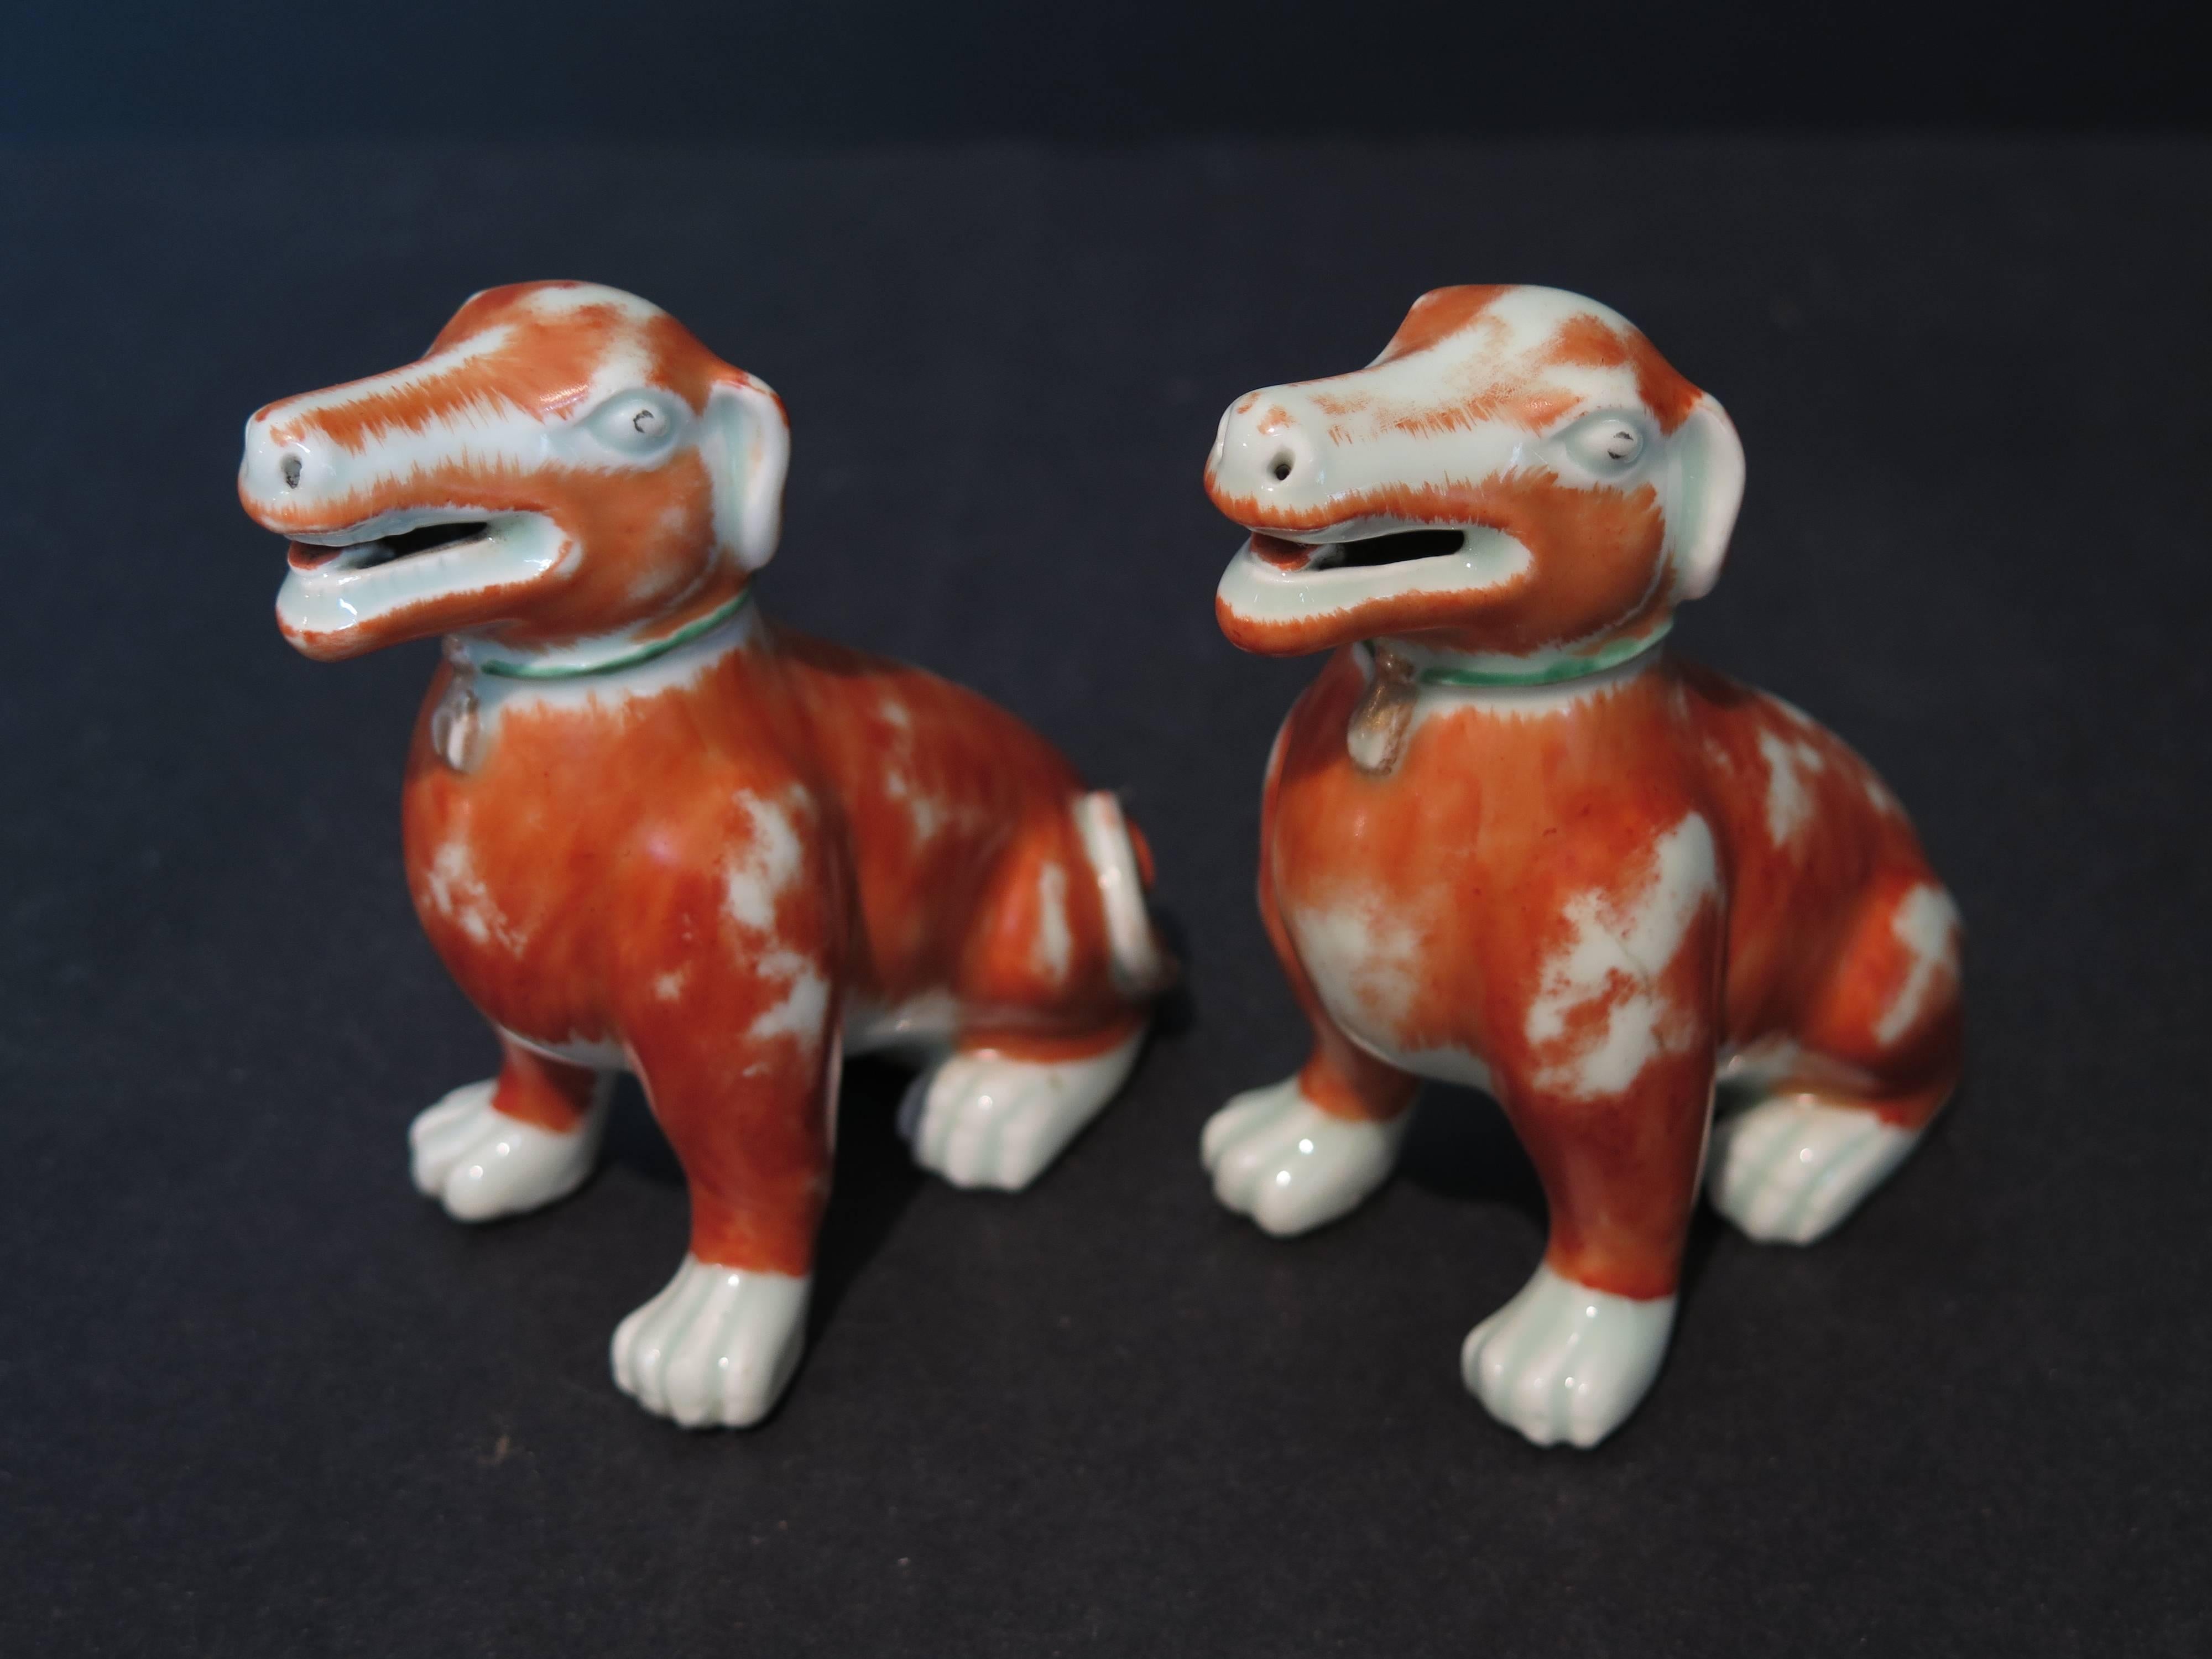 A pair of 18th century Chinese export iron red, smiling, curly-tailed dog figures made of porcelain with green enamel collar and gilt tag. Measures: 4.5